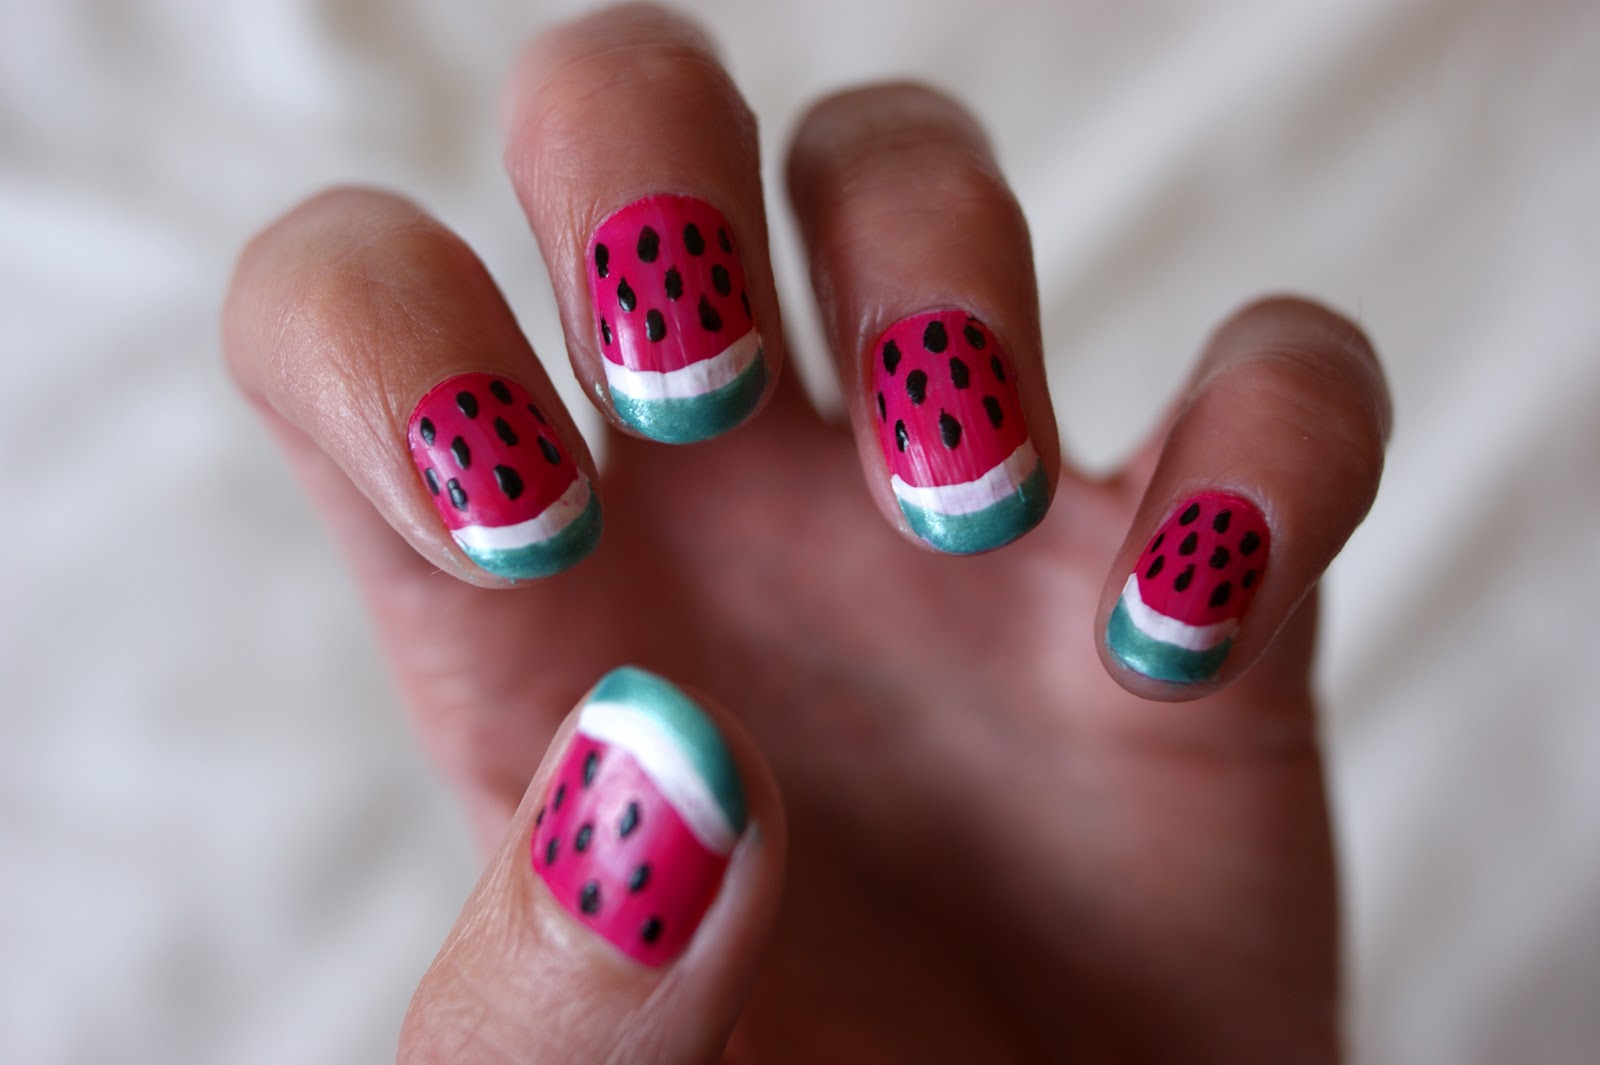 6. Step-by-Step Guide to Doing Nail Art at Home - wide 2